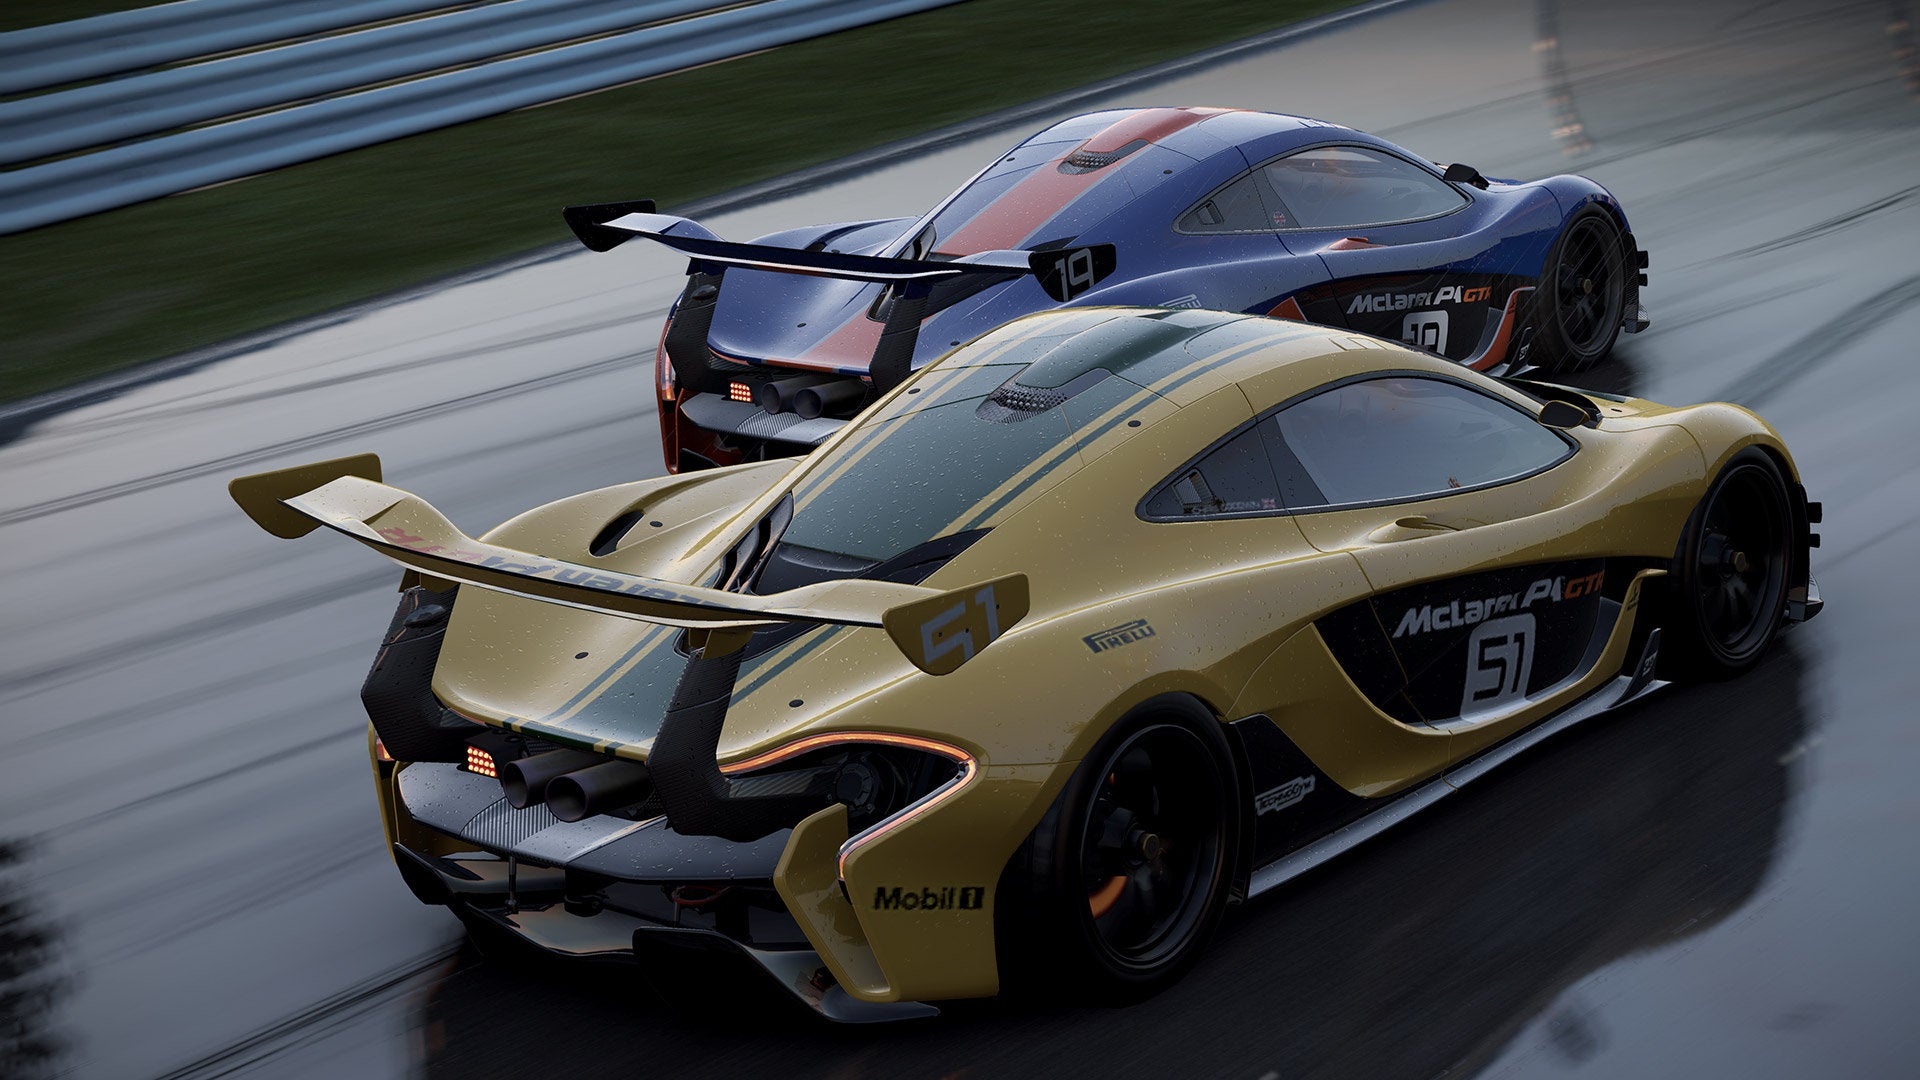 Screenshot from Project Cars 2 showing racing cars on track.